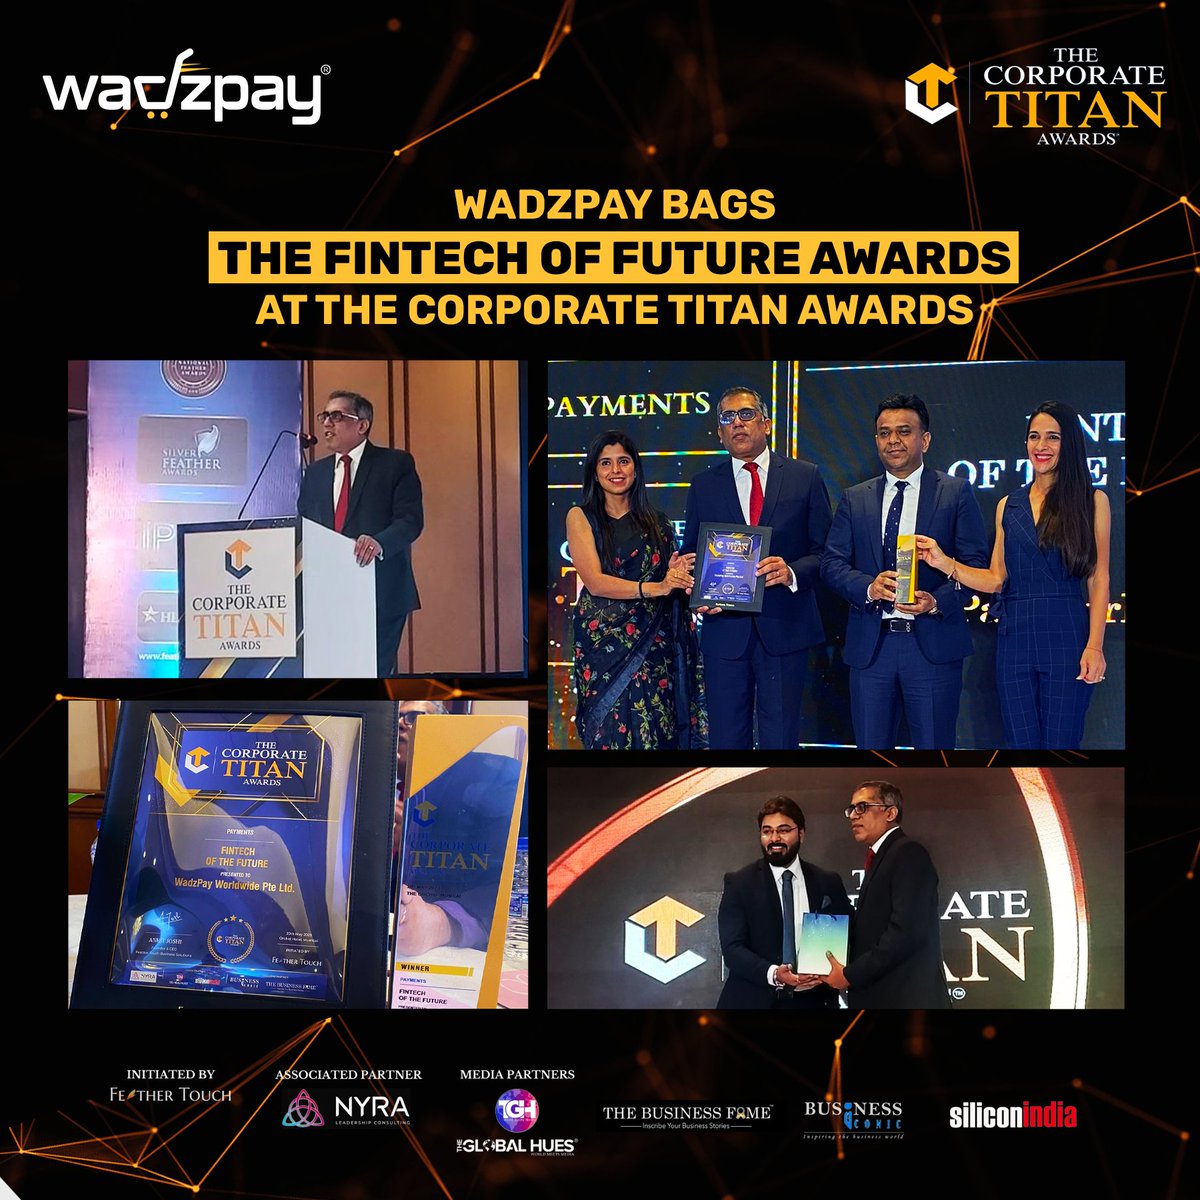 Celebrating a momentous achievement! 🎉

WadzPay proudly accepts the prestigious 'Fintech of the Future' awards at the Corporate Titan Awards. 🏆

@amitmalik99 @Anish_tweeets 

#WadzPay #CorporateTitanAwards #Fintech #Innovation #technology